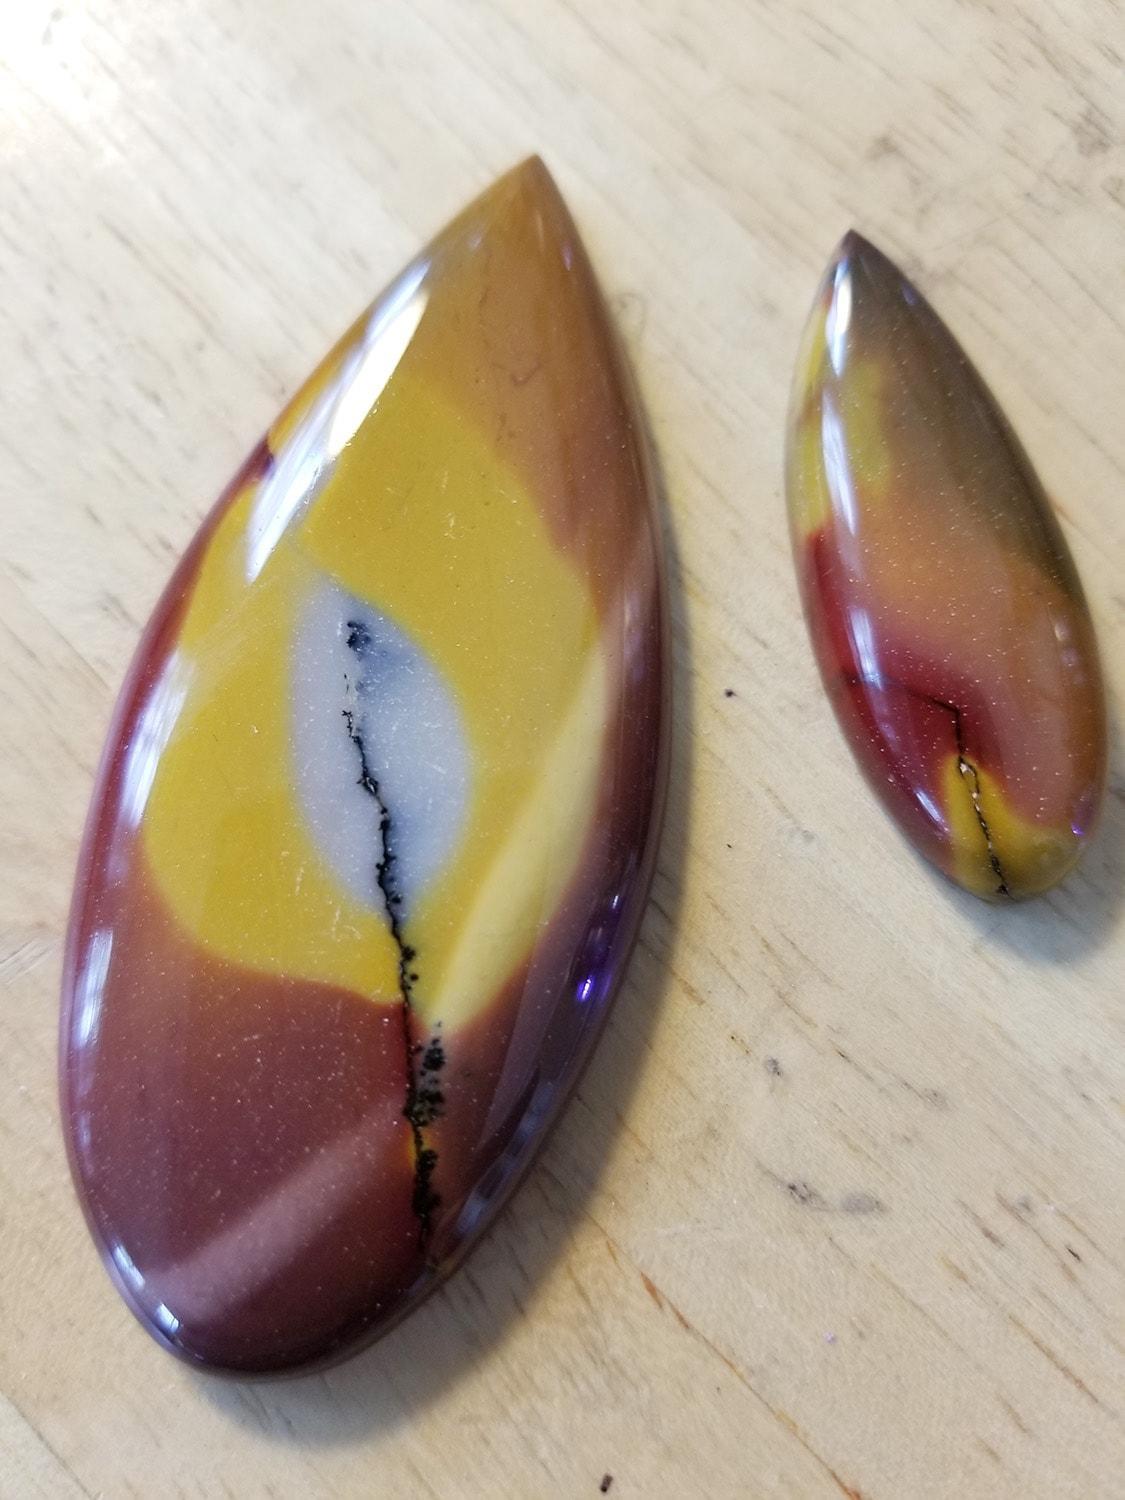 Teardrop shaped mookite cabochons in reds, yellow, white, and black